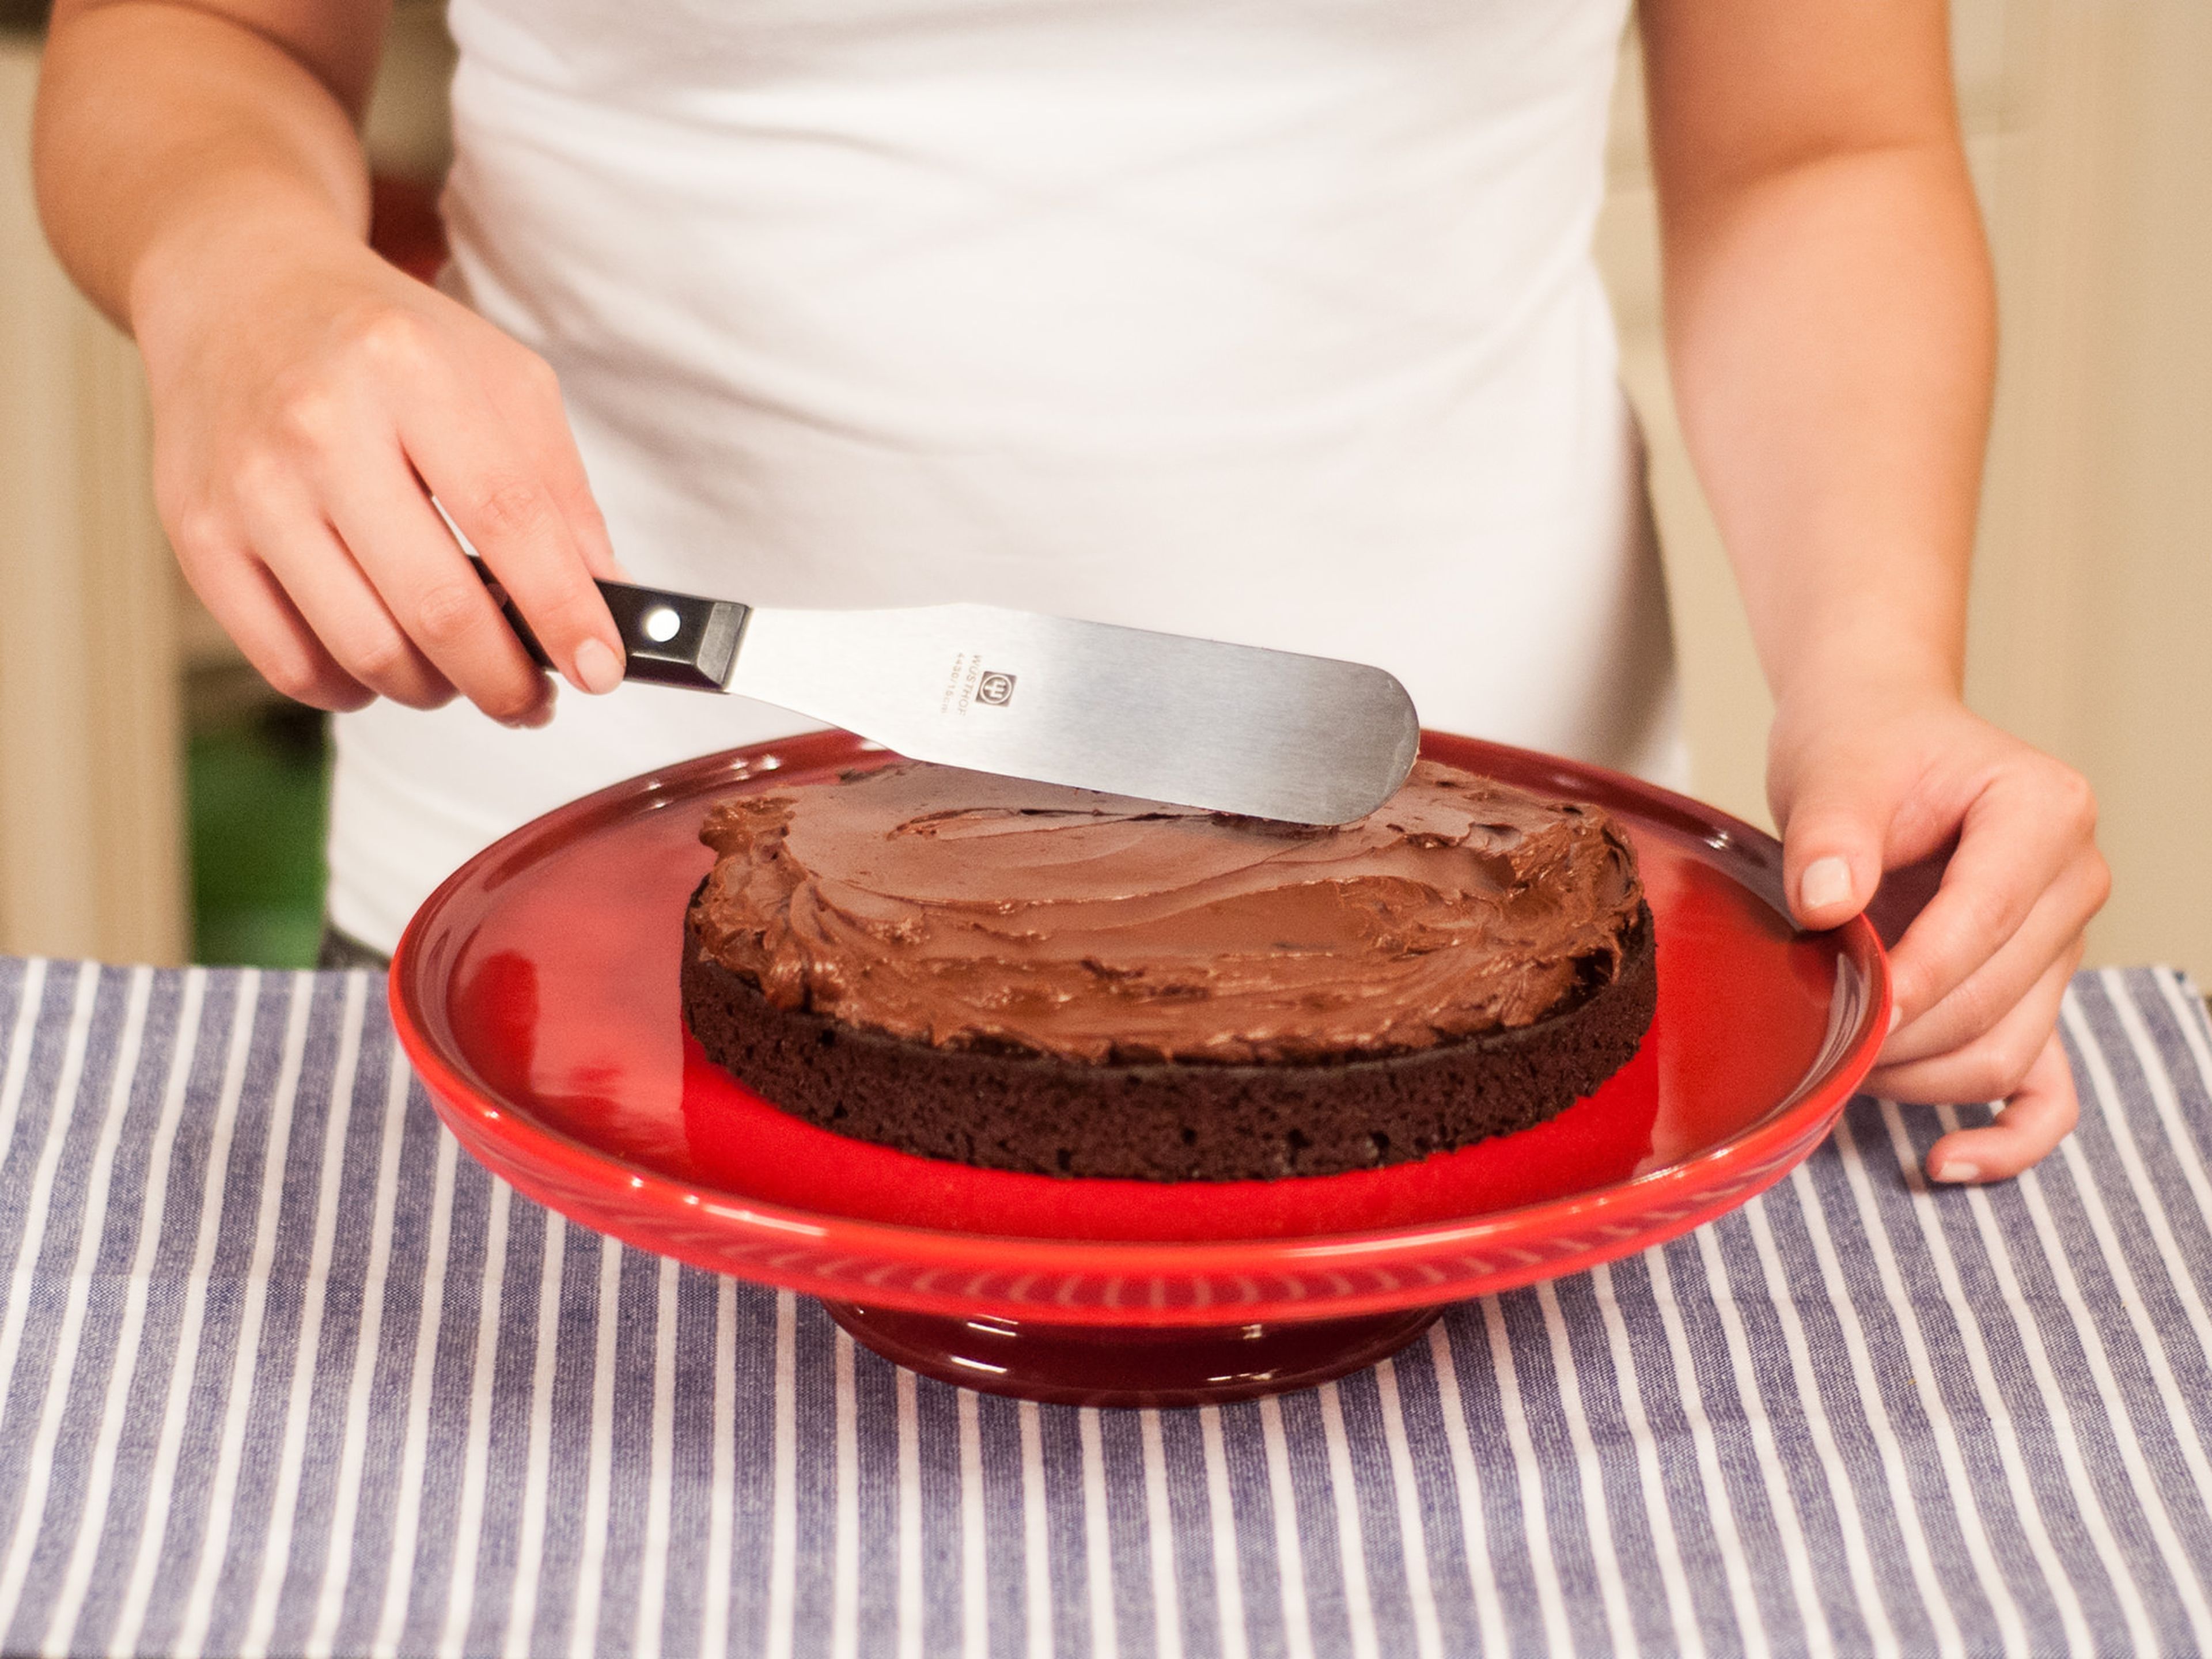 Release the cake and spread a generous amount of the chocolate mixture onto the first cake base.